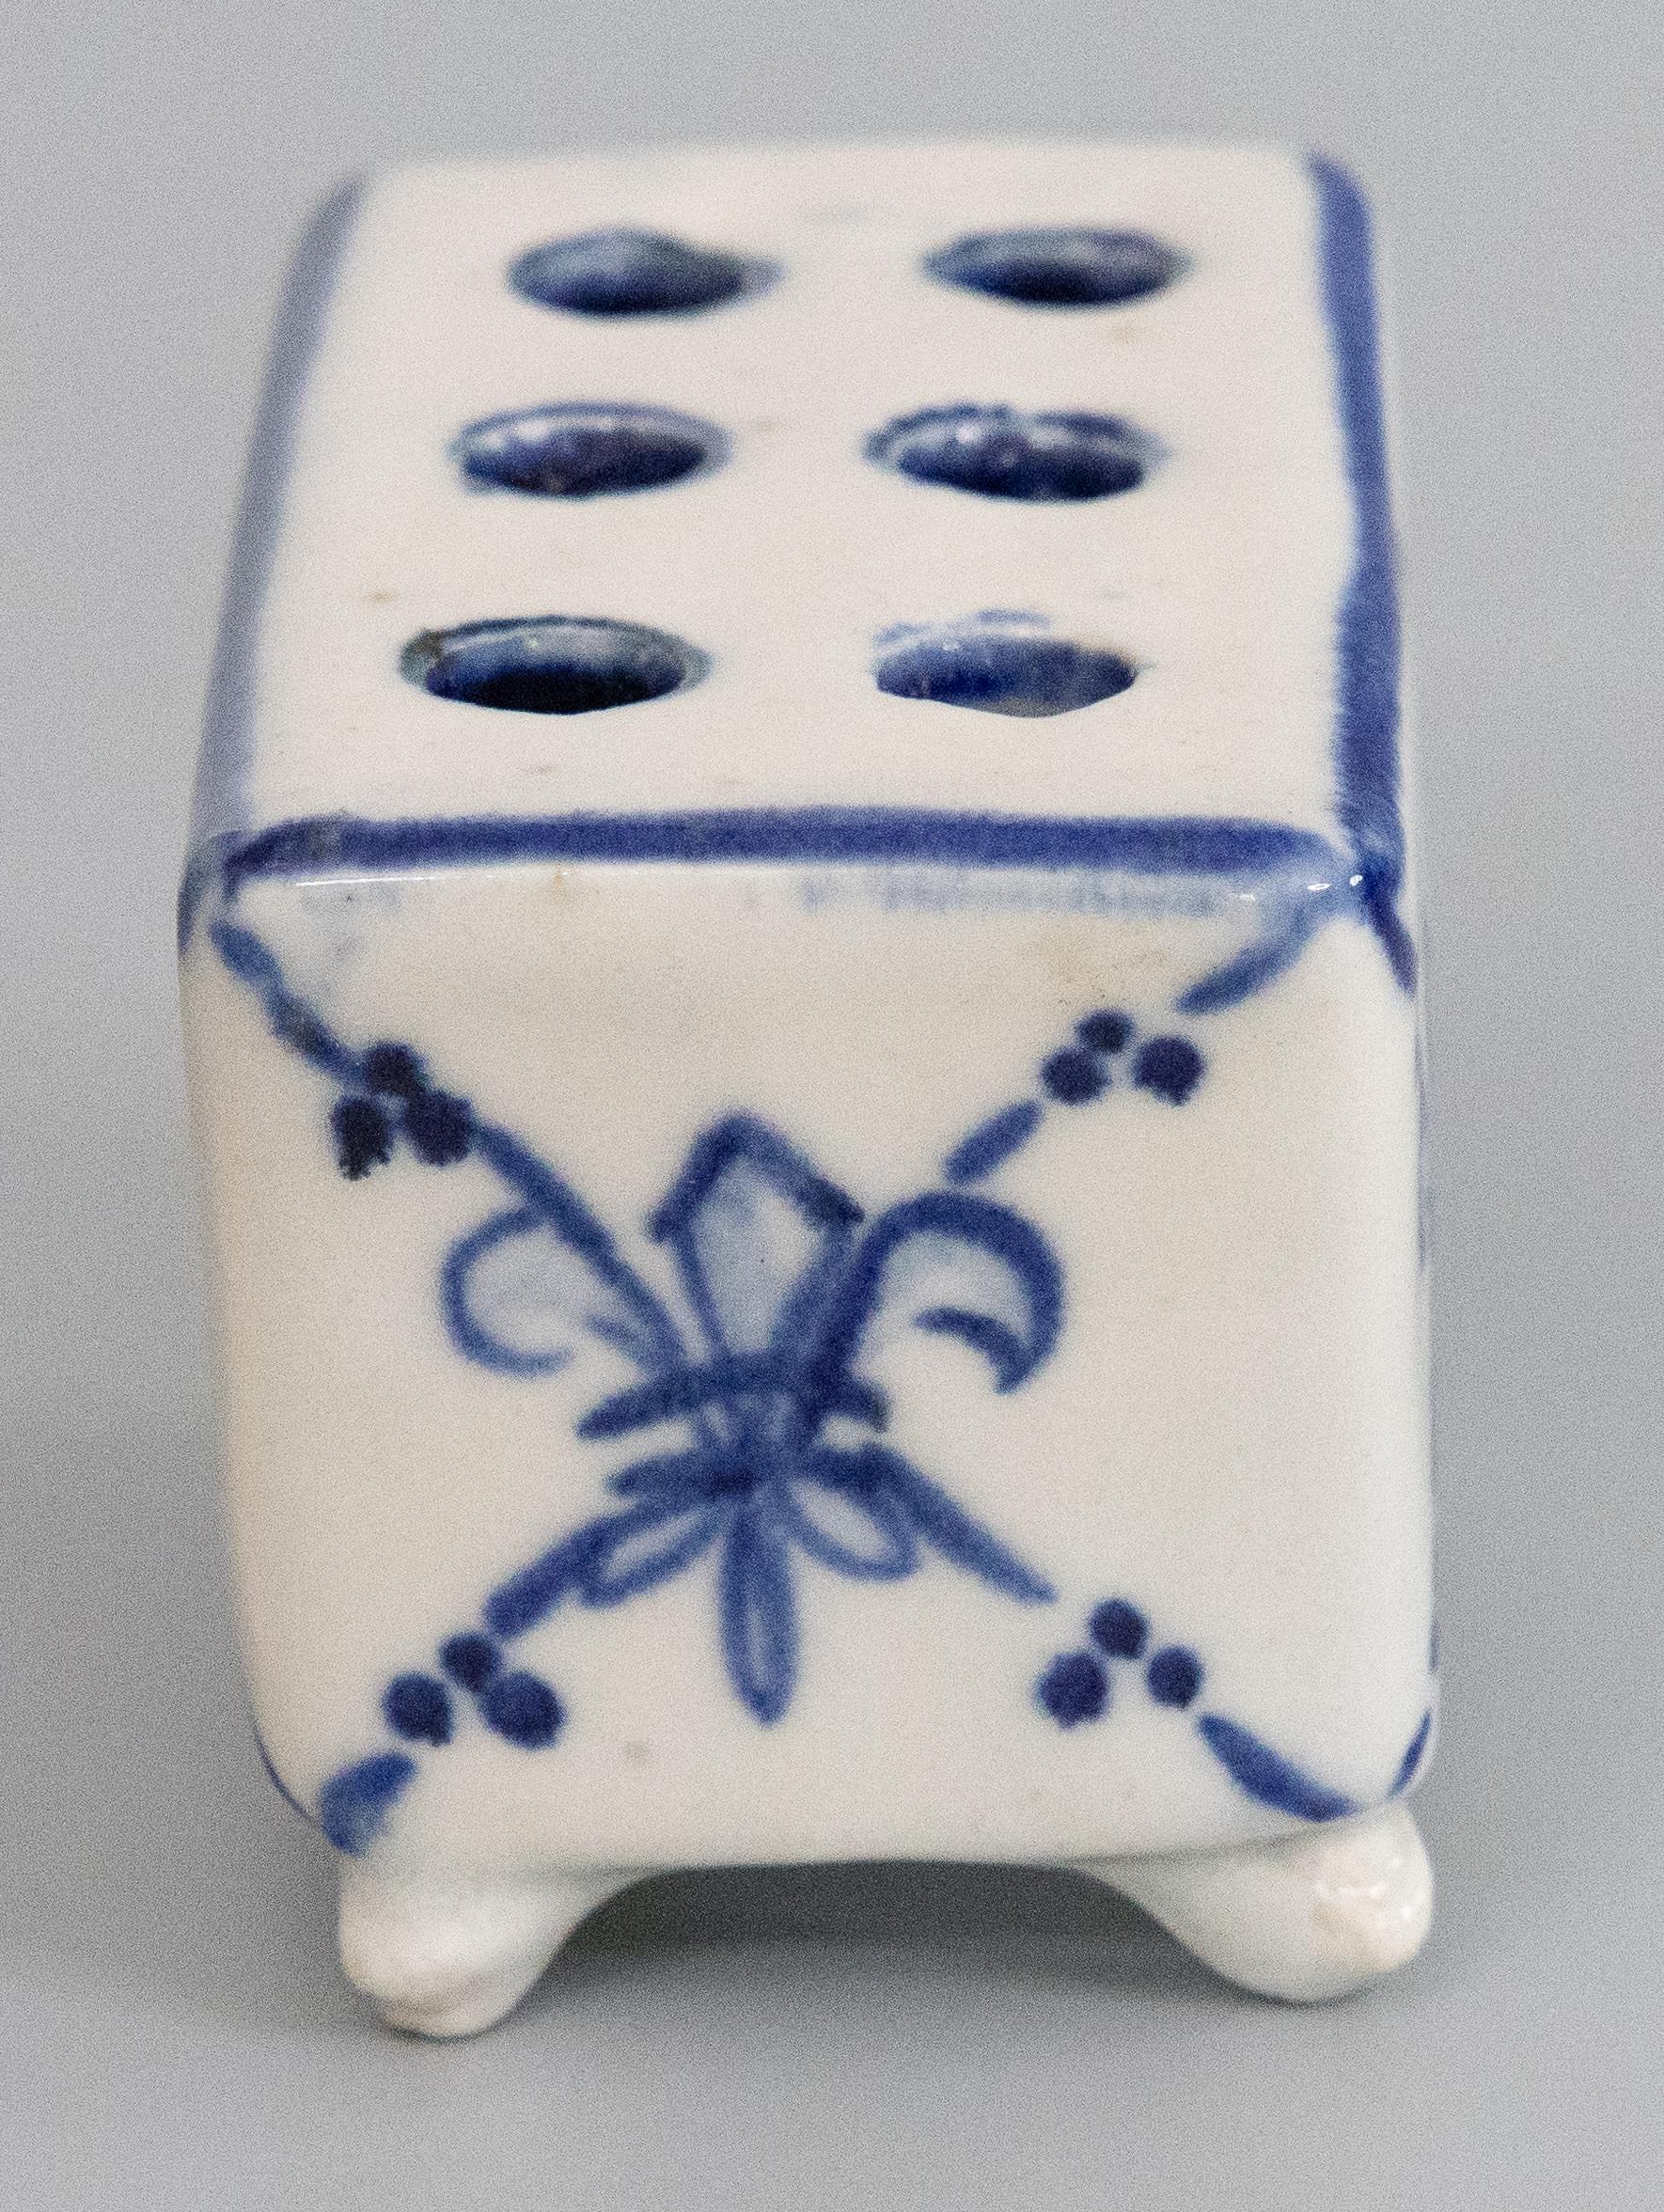 A fine antique early 20th-century French faience hand molded flower brick or flower frog vase. This charming footed flower pot has a hand painted fleur-de-lis design in vibrant cobalt blue and white. It would be lovely with your favorite flowers or